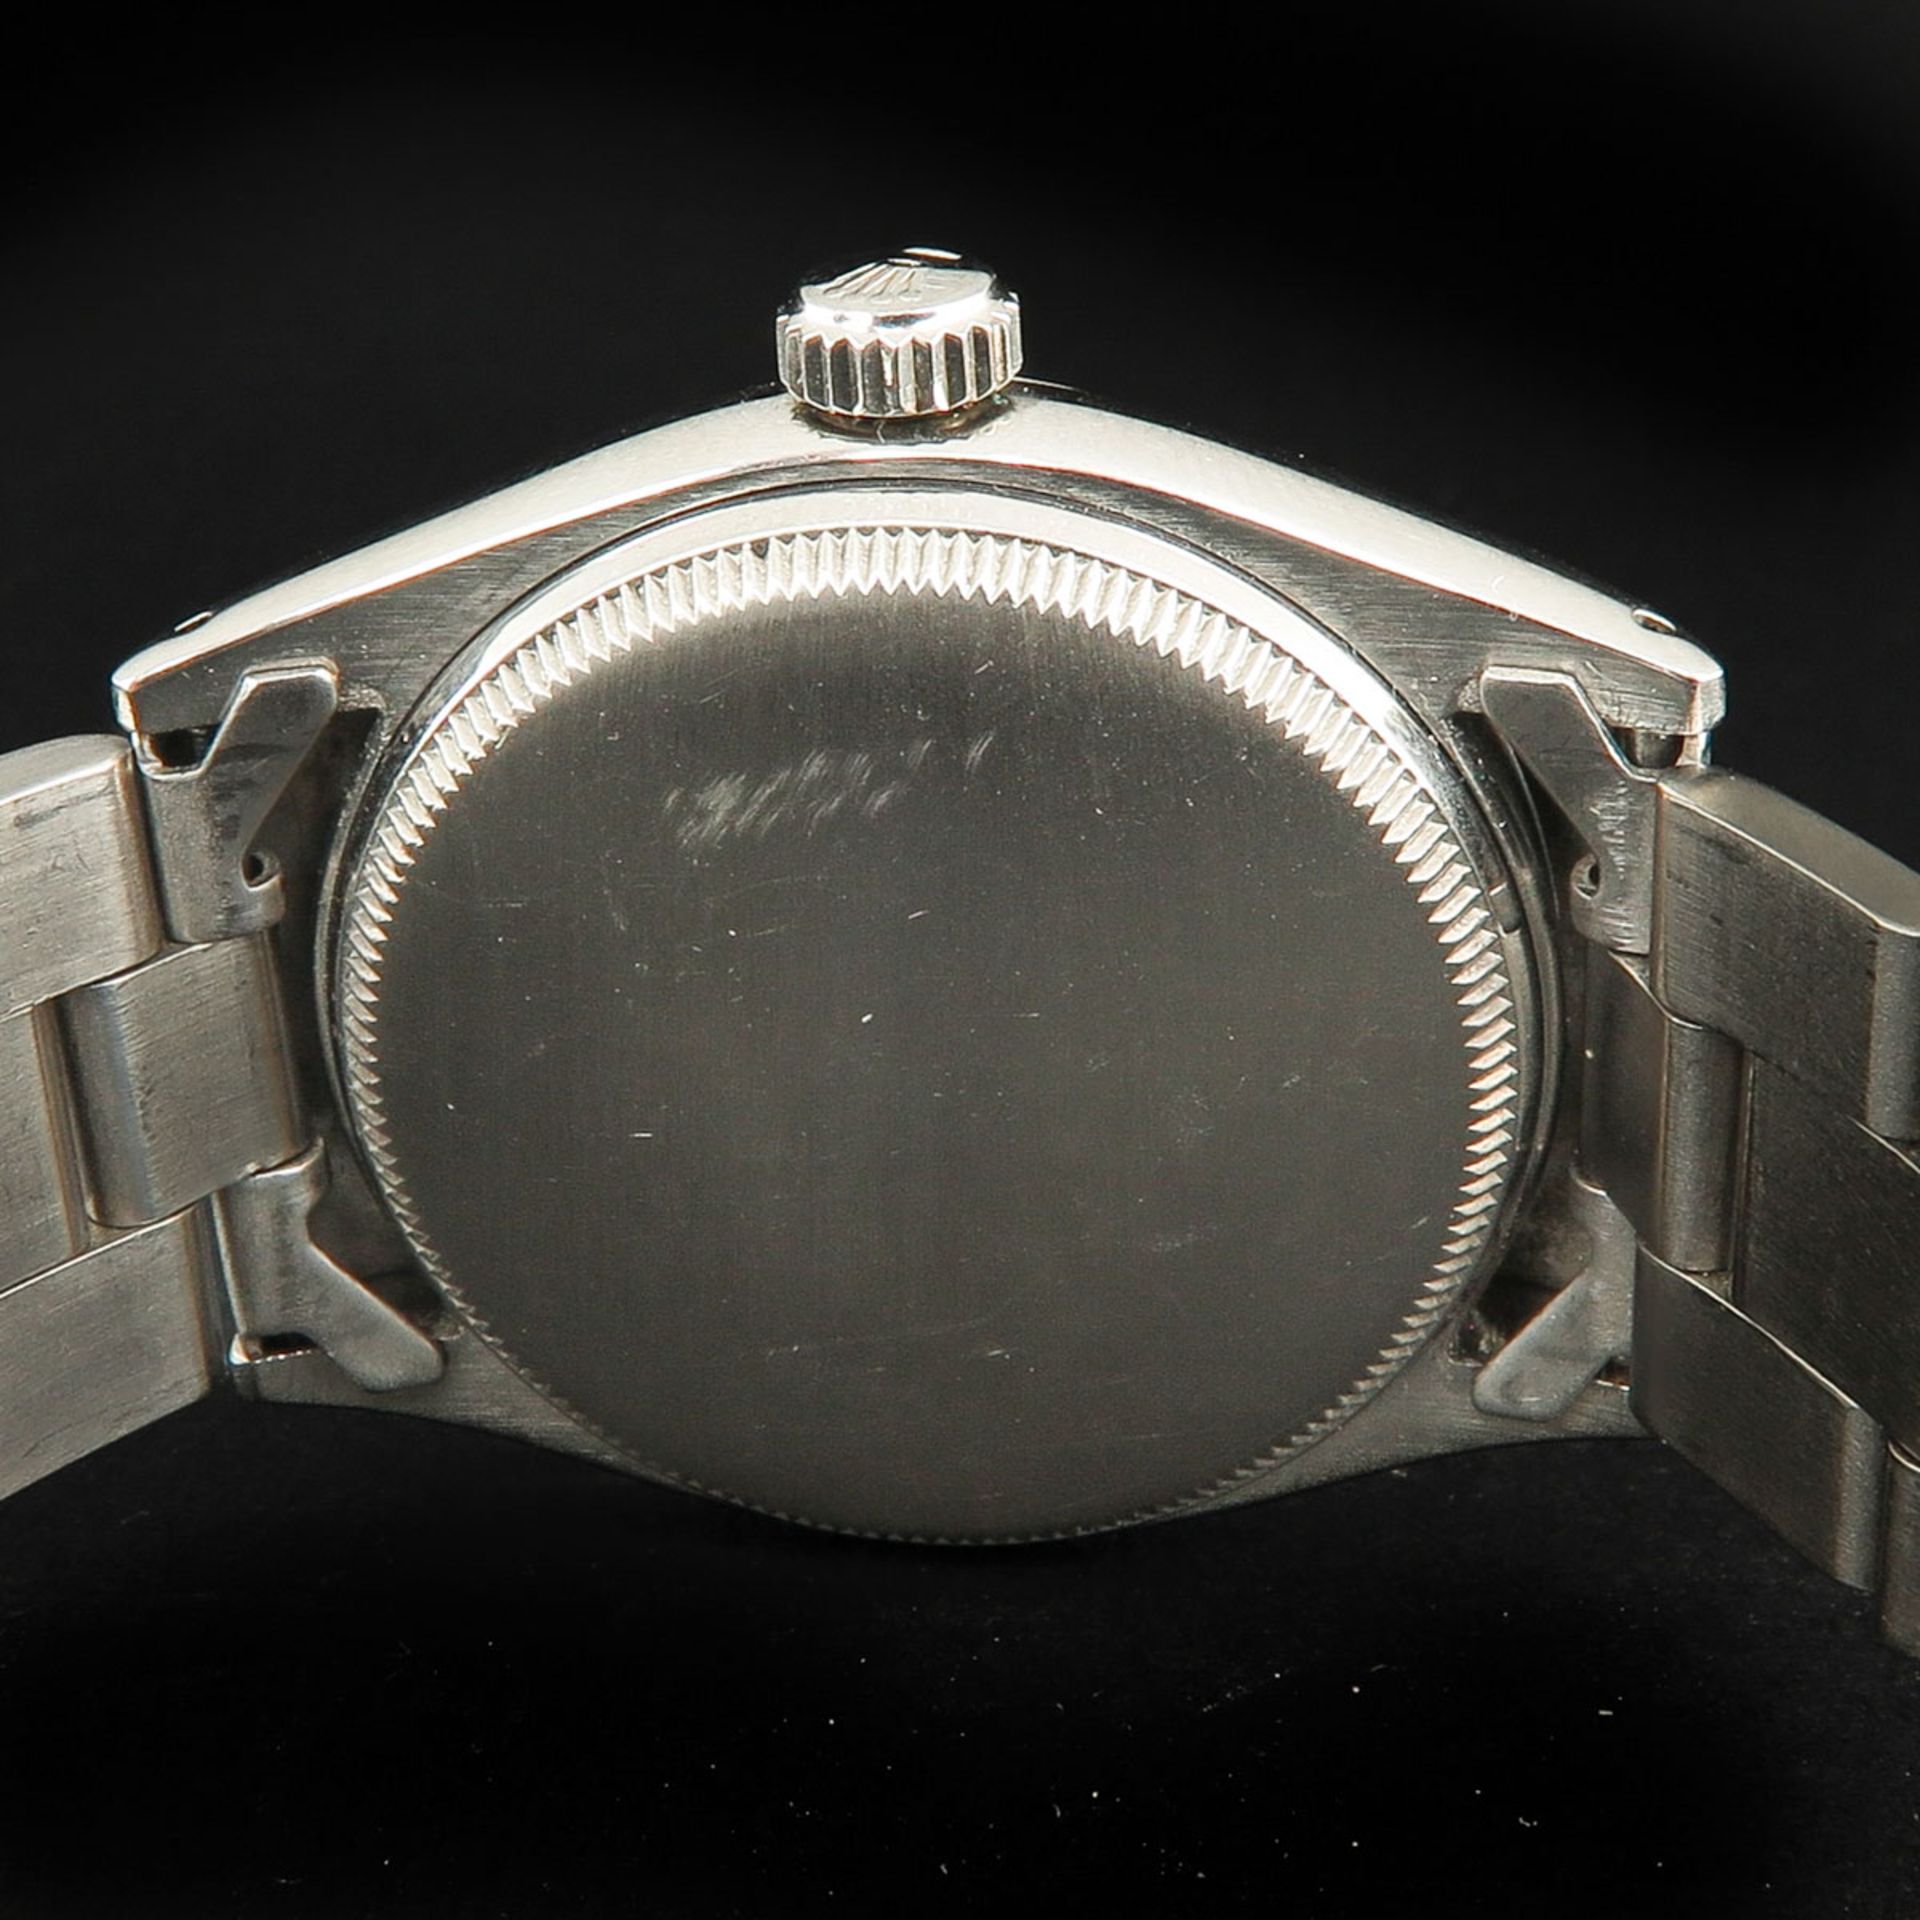 A Mens Rolex Watch - Image 4 of 4